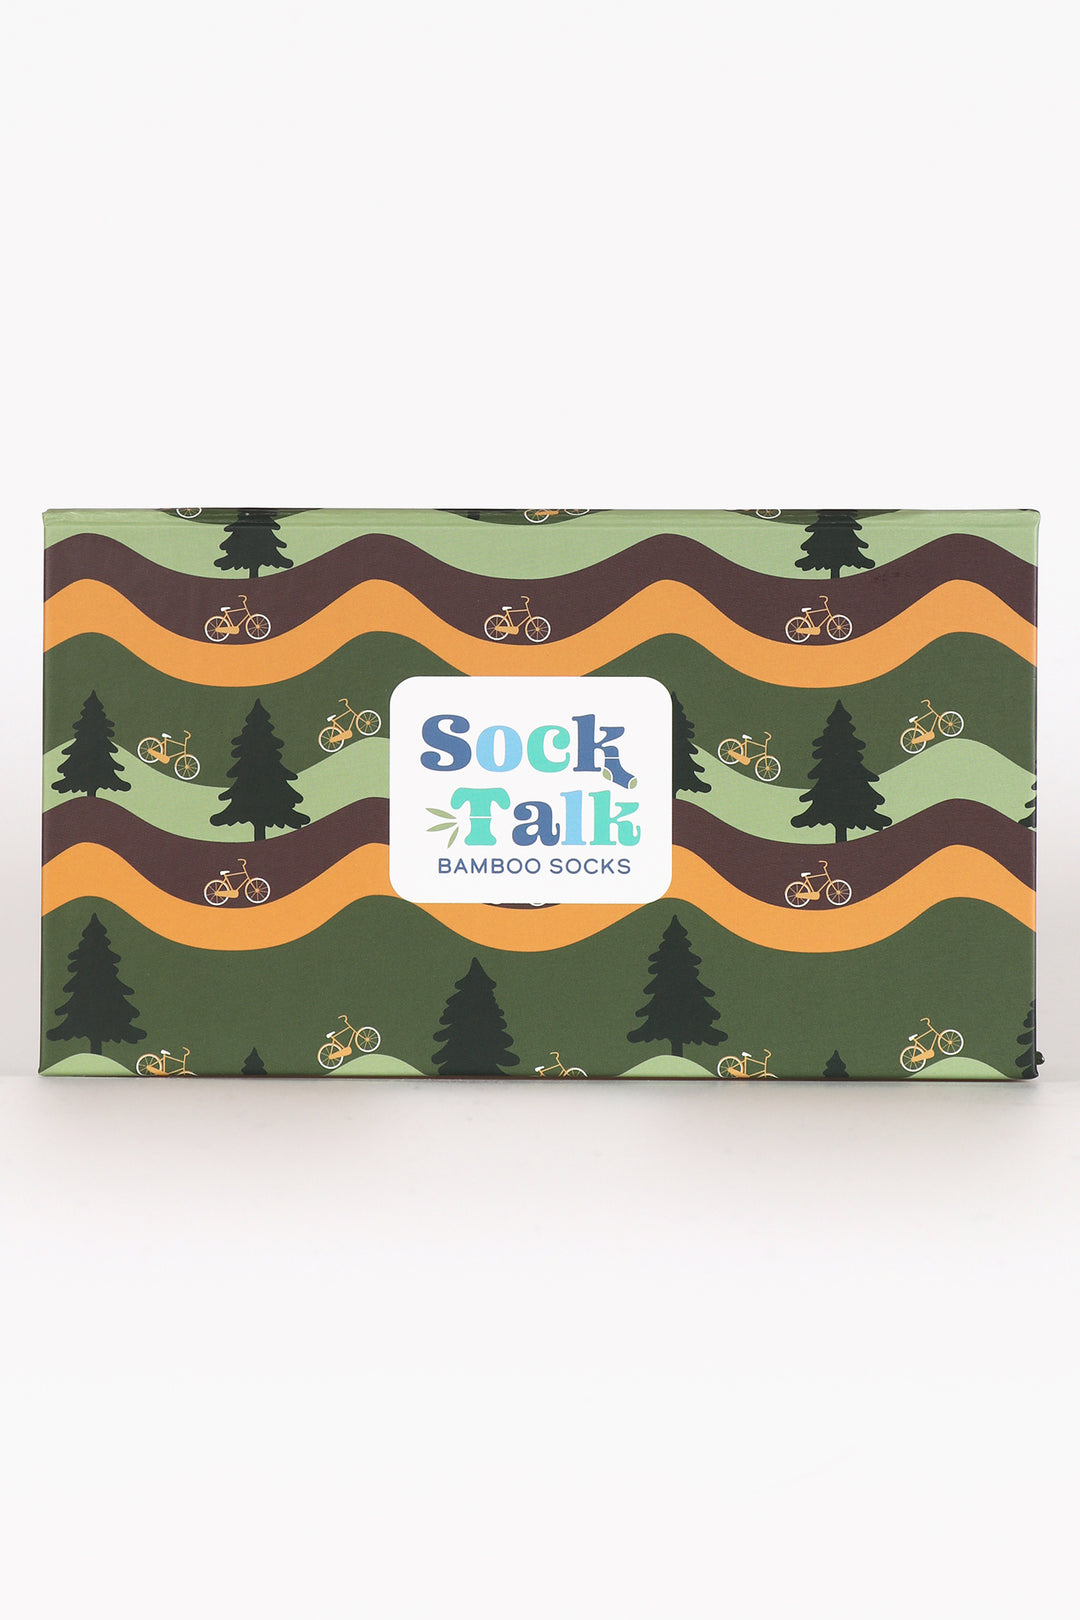 green gift box with wavy yellow and brown stripes, featuring green forest trees and mountain bikes